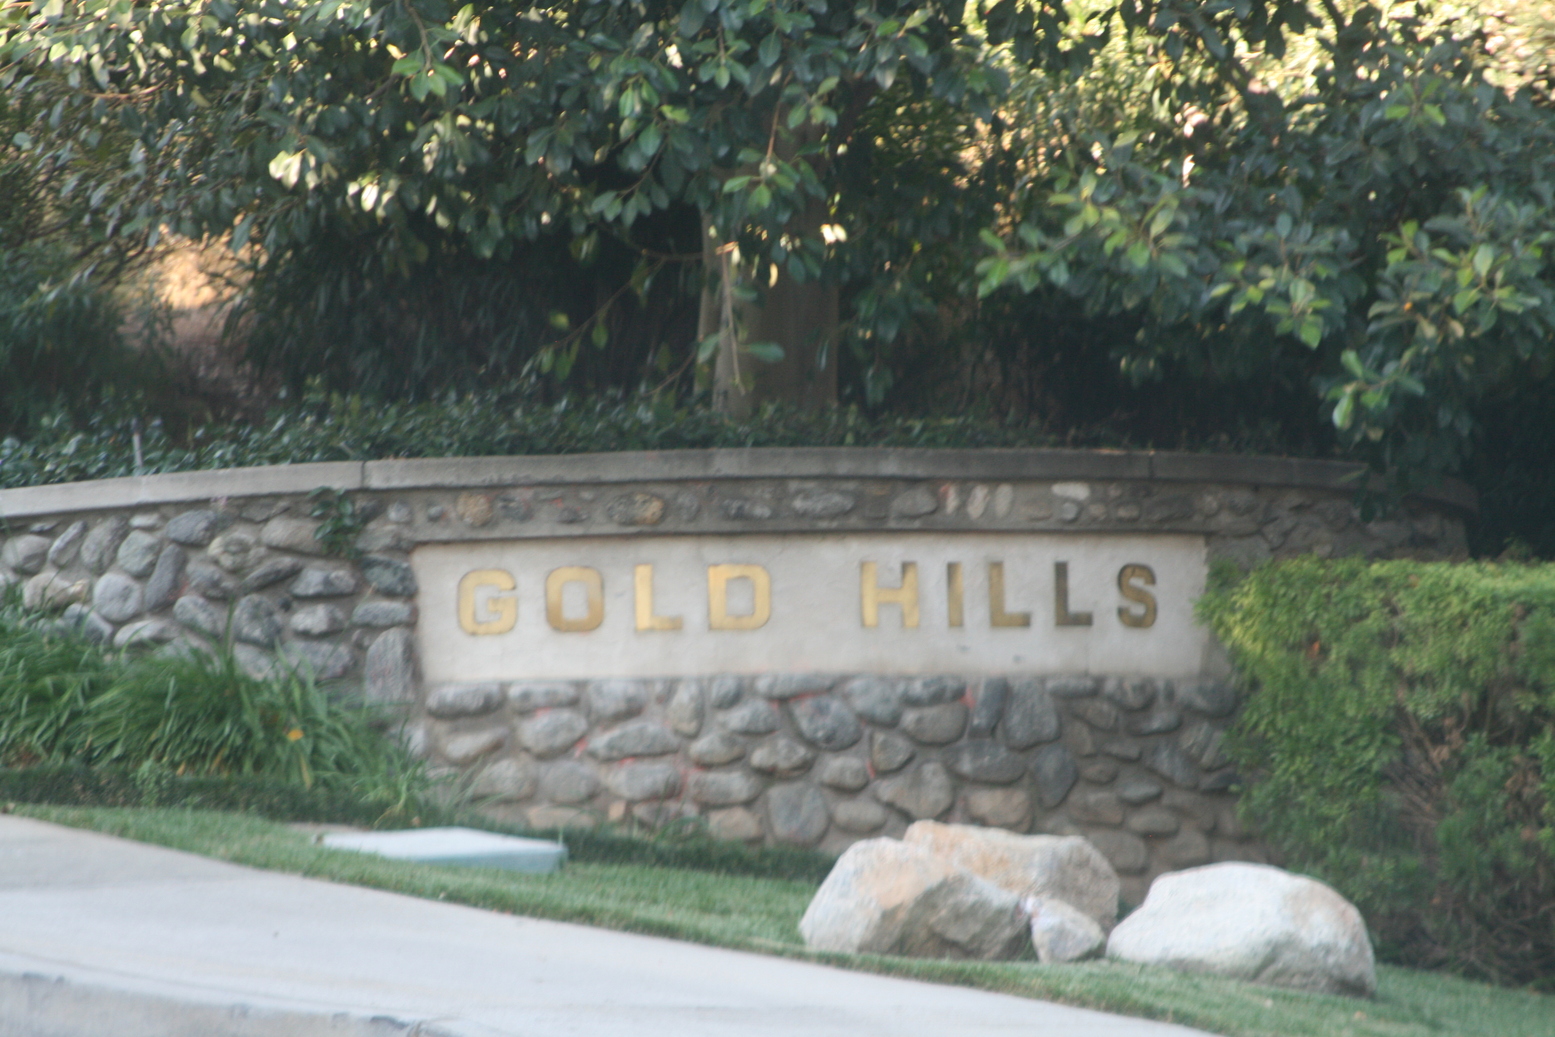 Monrovia, CA: Entry to Gold Hills in Monrovia at the top of Myrtle Ave.